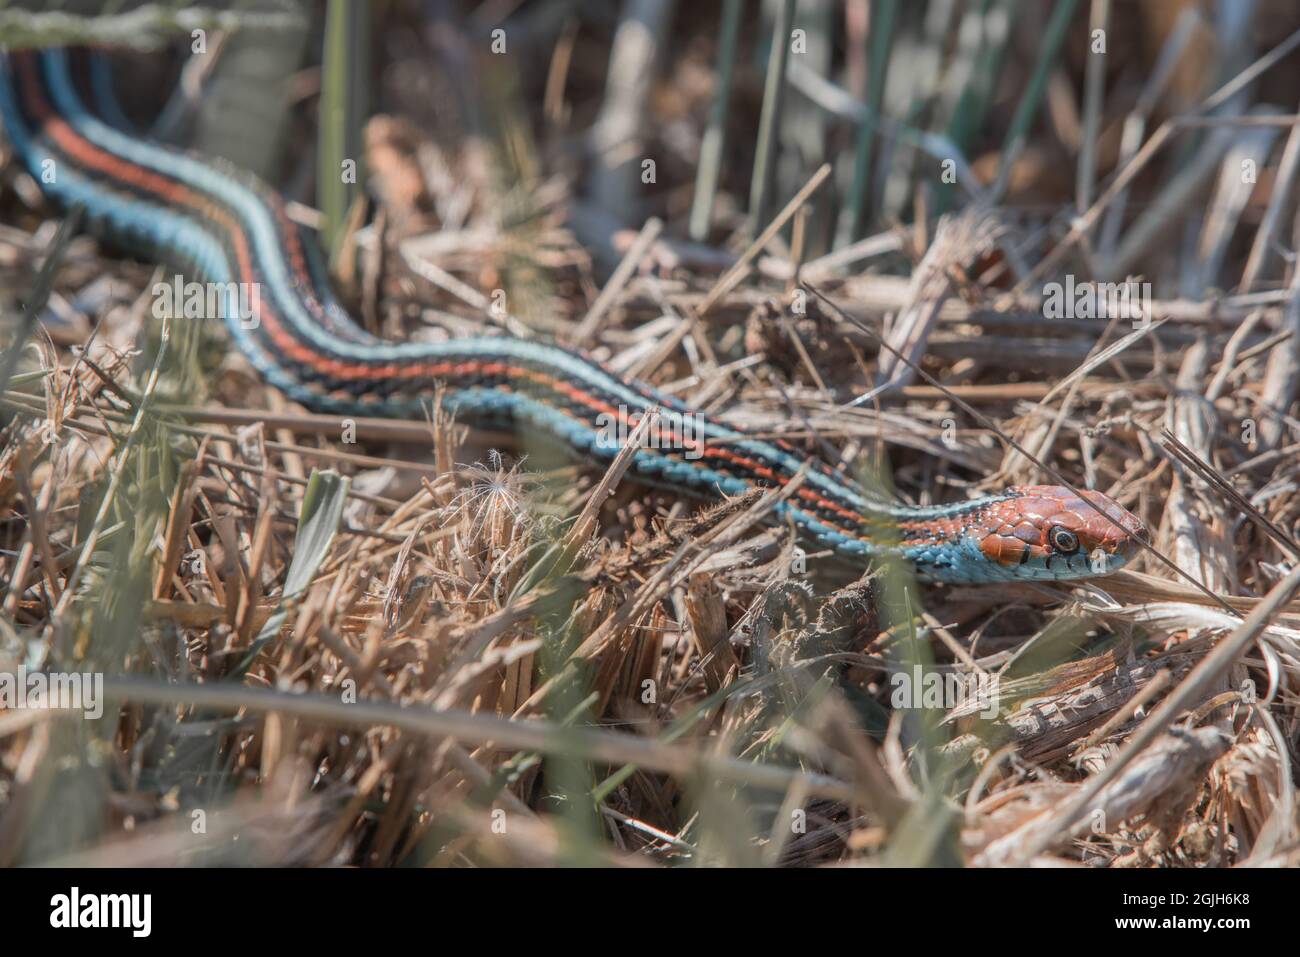 The endangered San Francisco garter snake (Thamnophis sirtalis tetrataenia) is considered one of the most beautiful snakes in the world. Stock Photo